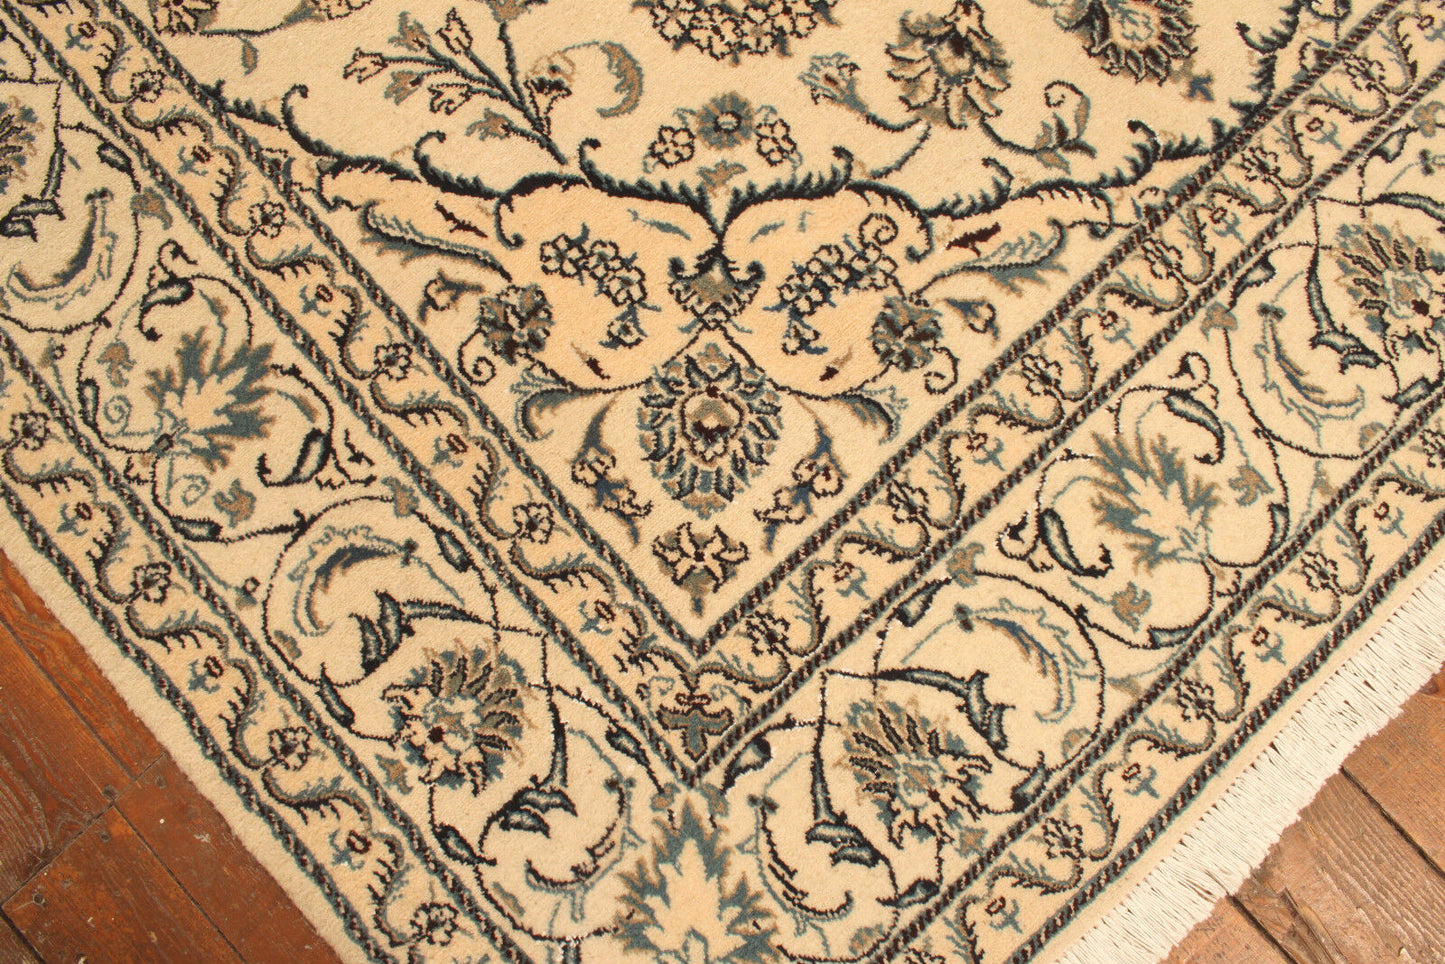 Close-up of intricate patterns on the Handmade Contemporary Persian Nain Rug